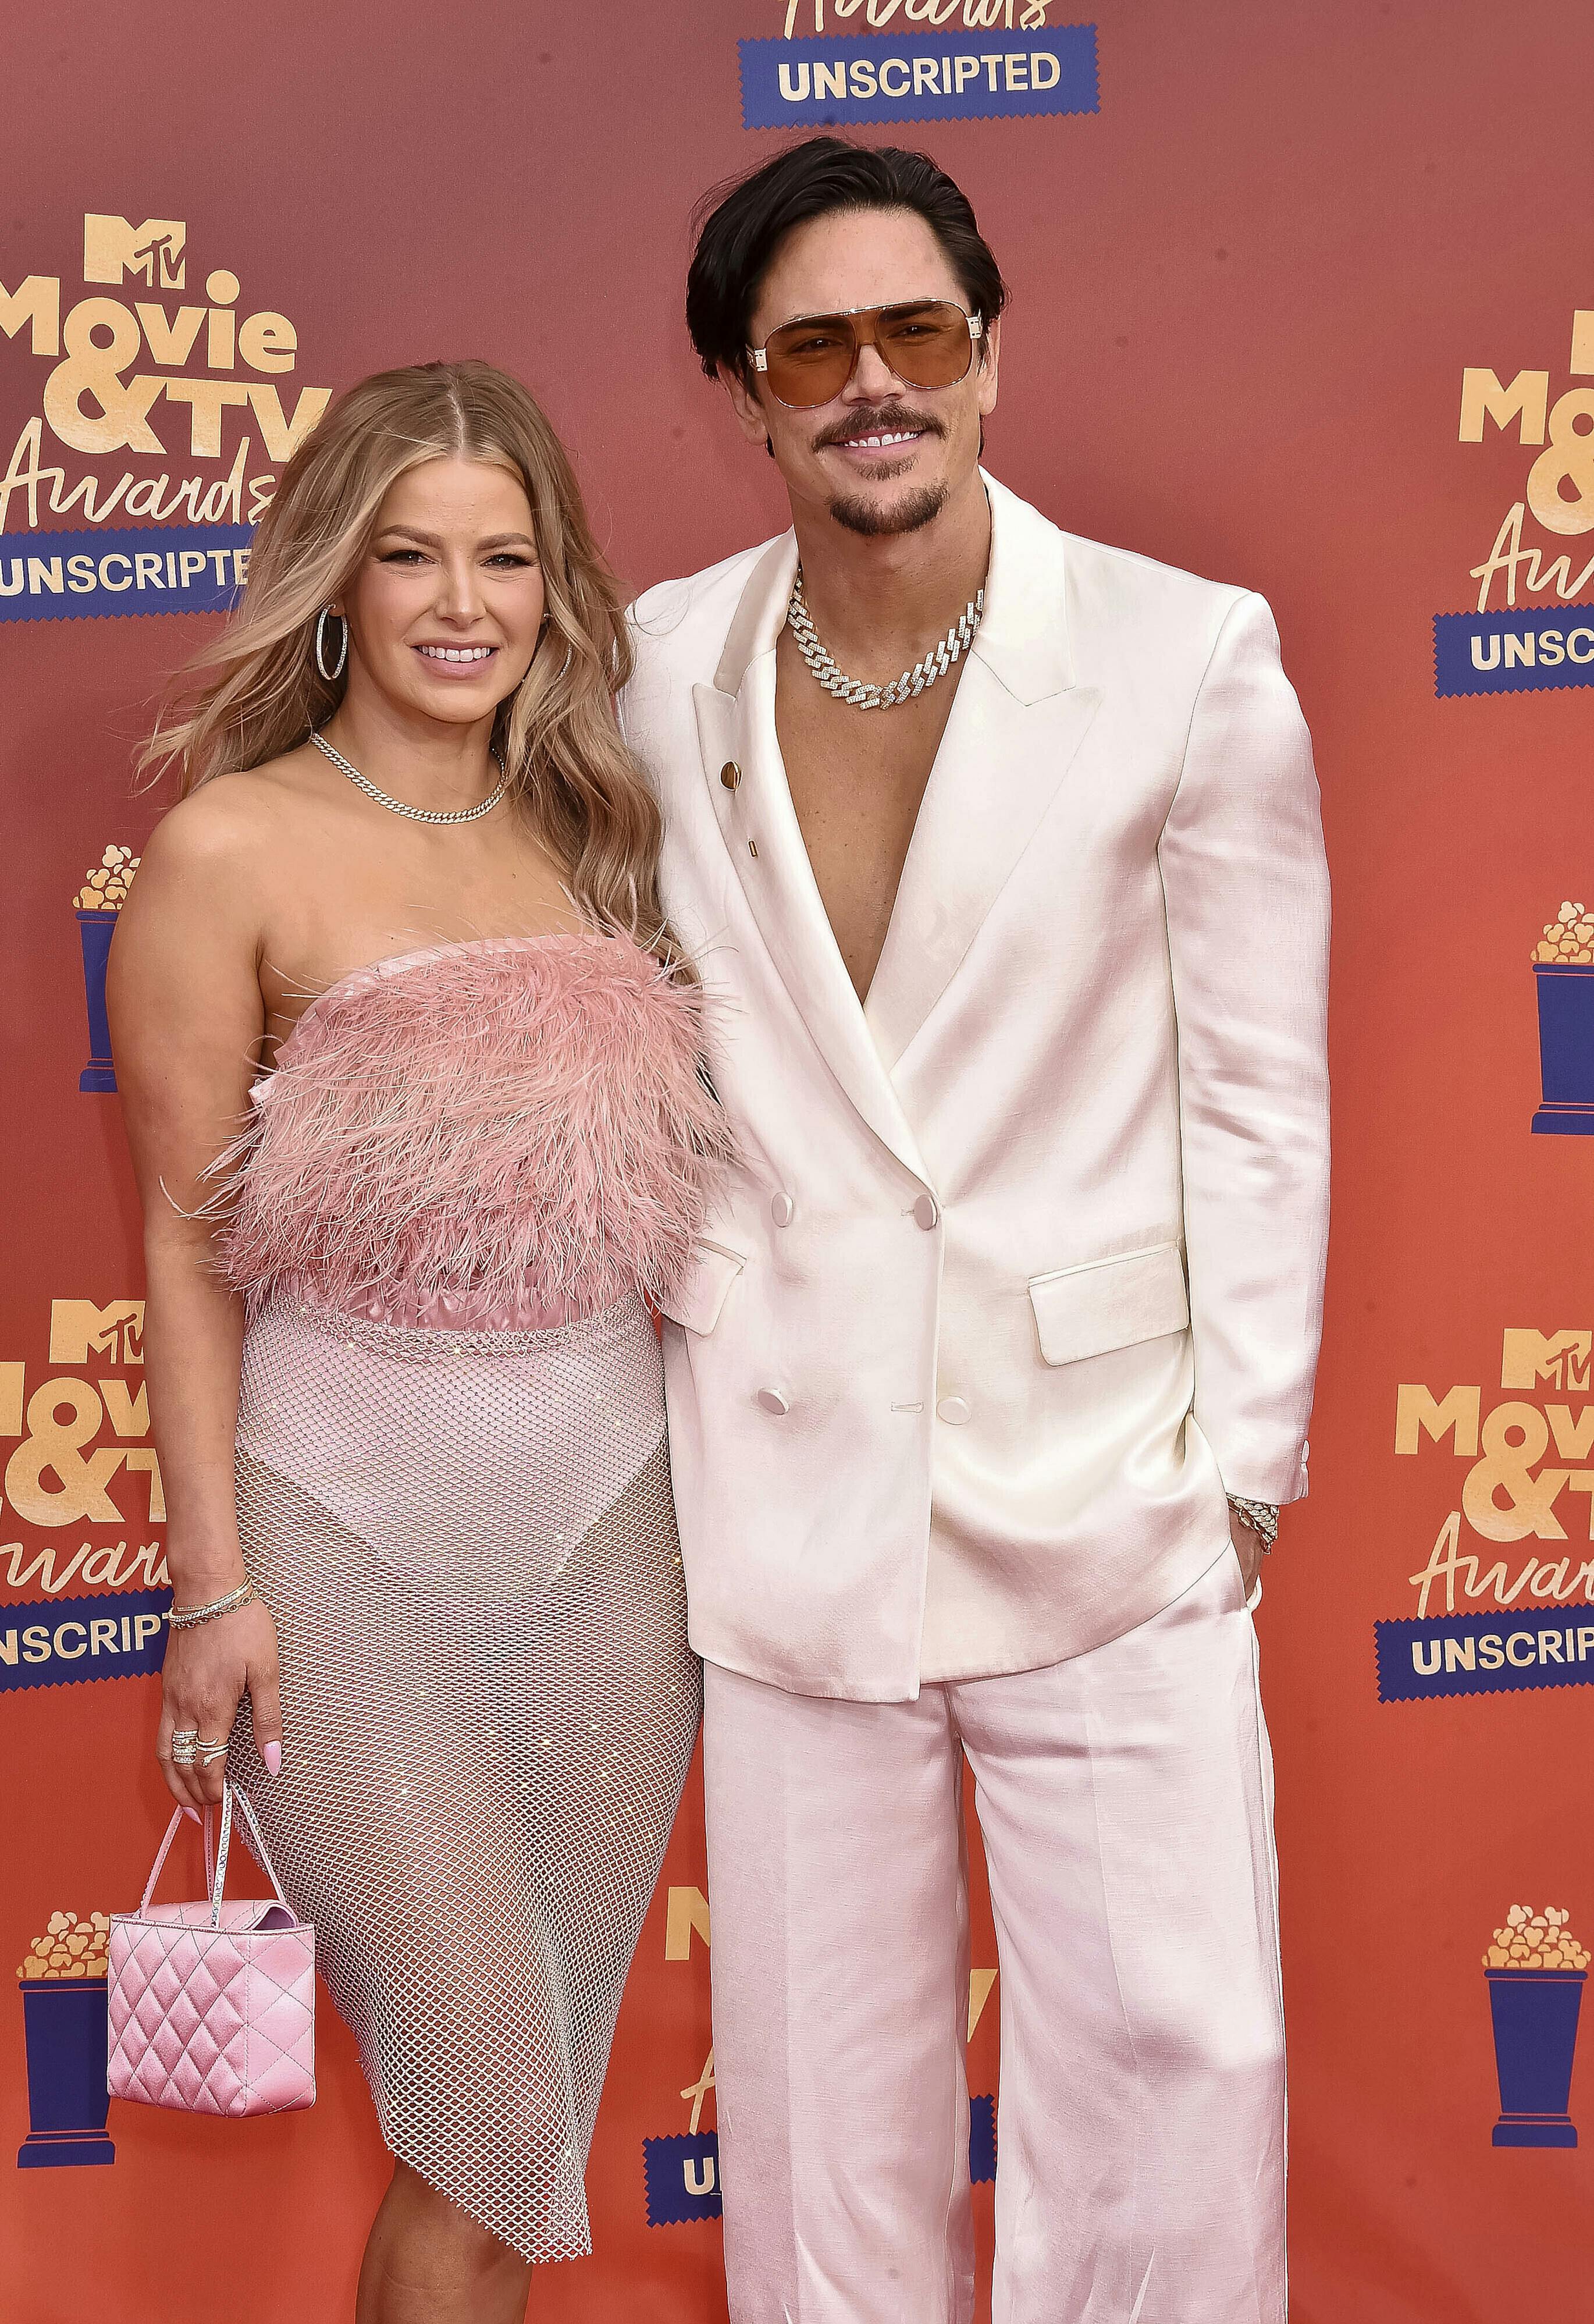 Ariana Madix and Tom Sandoval attend the 2022 MTV Movie and TV Awards: UNSCRIPTED at Barker Hangar in Santa Monica, Los Angeles, USA, on 02 June 2022. Photo by: Hubert Boesl/picture-alliance/dpa/AP Images